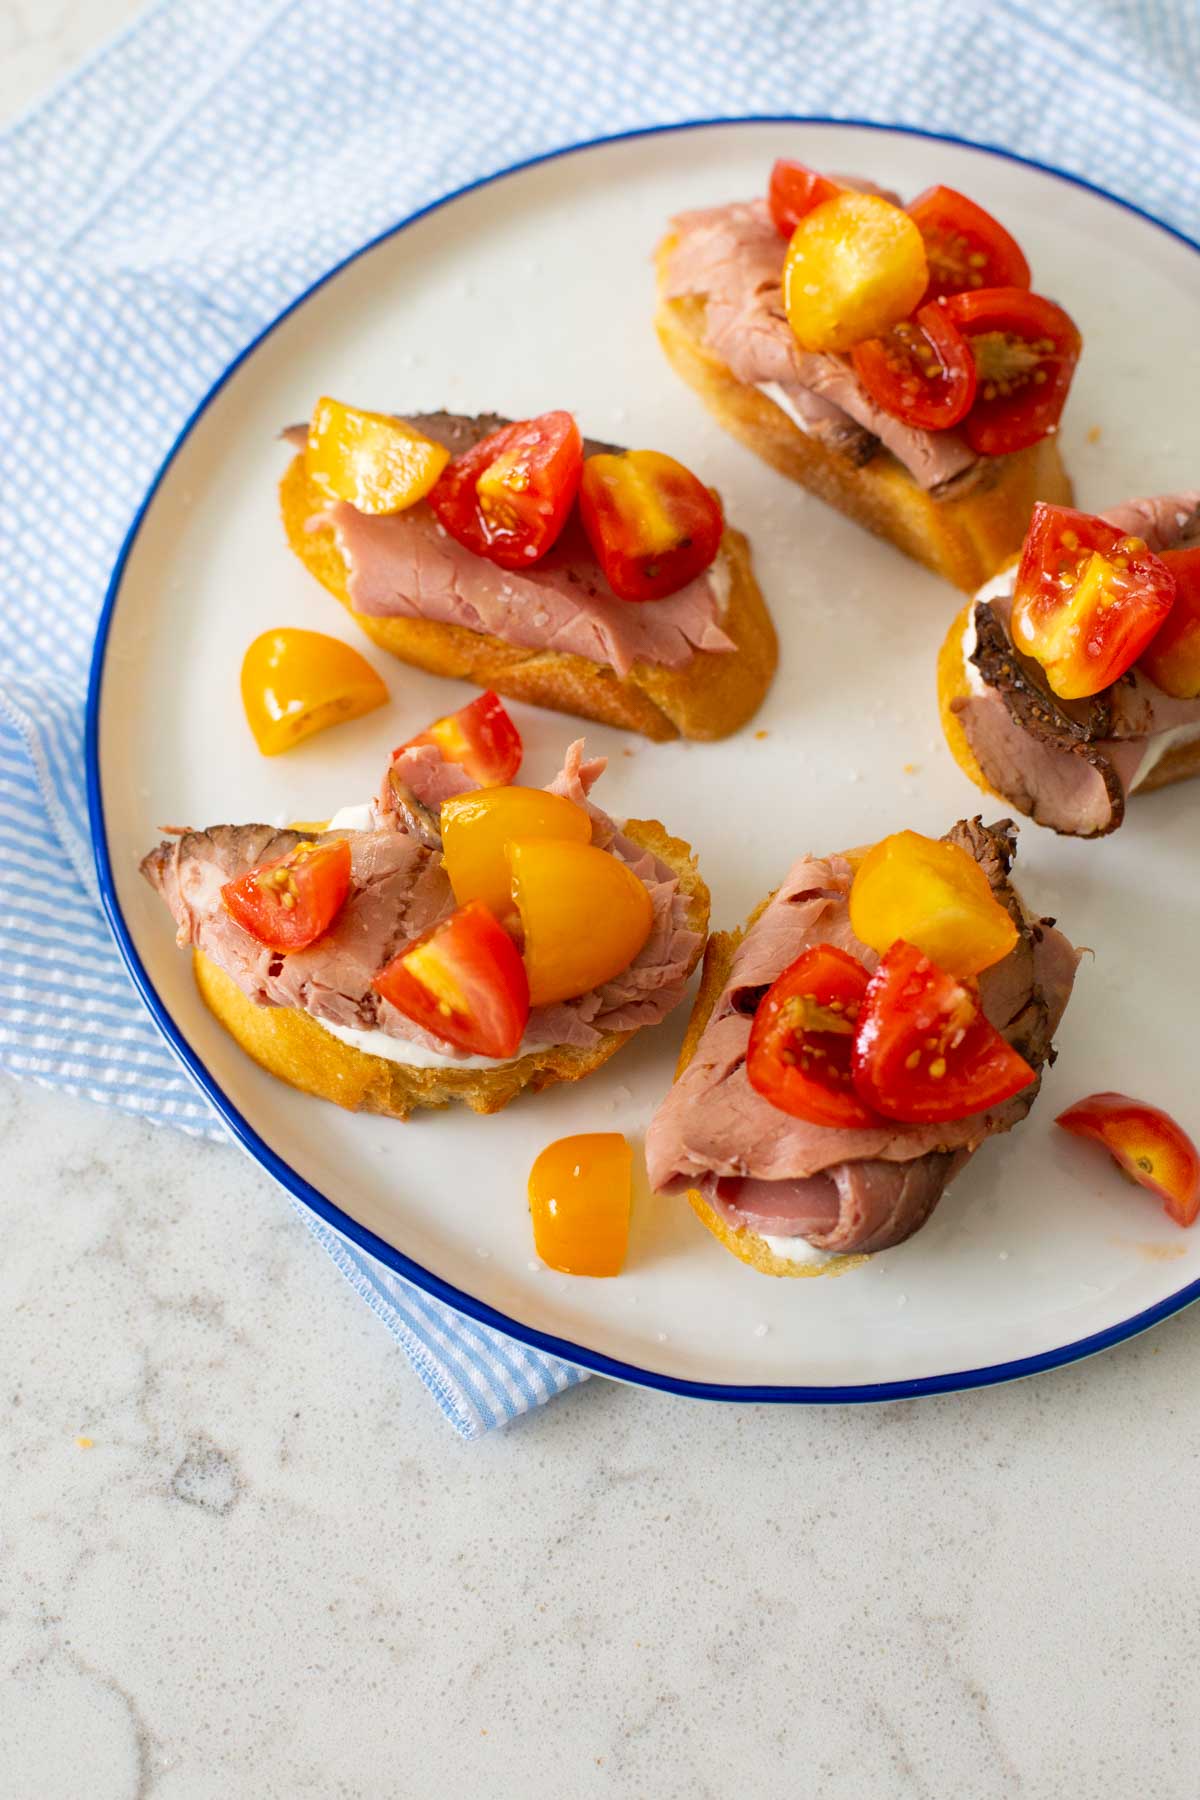 Yellow and red cherry tomatoes have been chopped and sprinkled over the beef crostini.